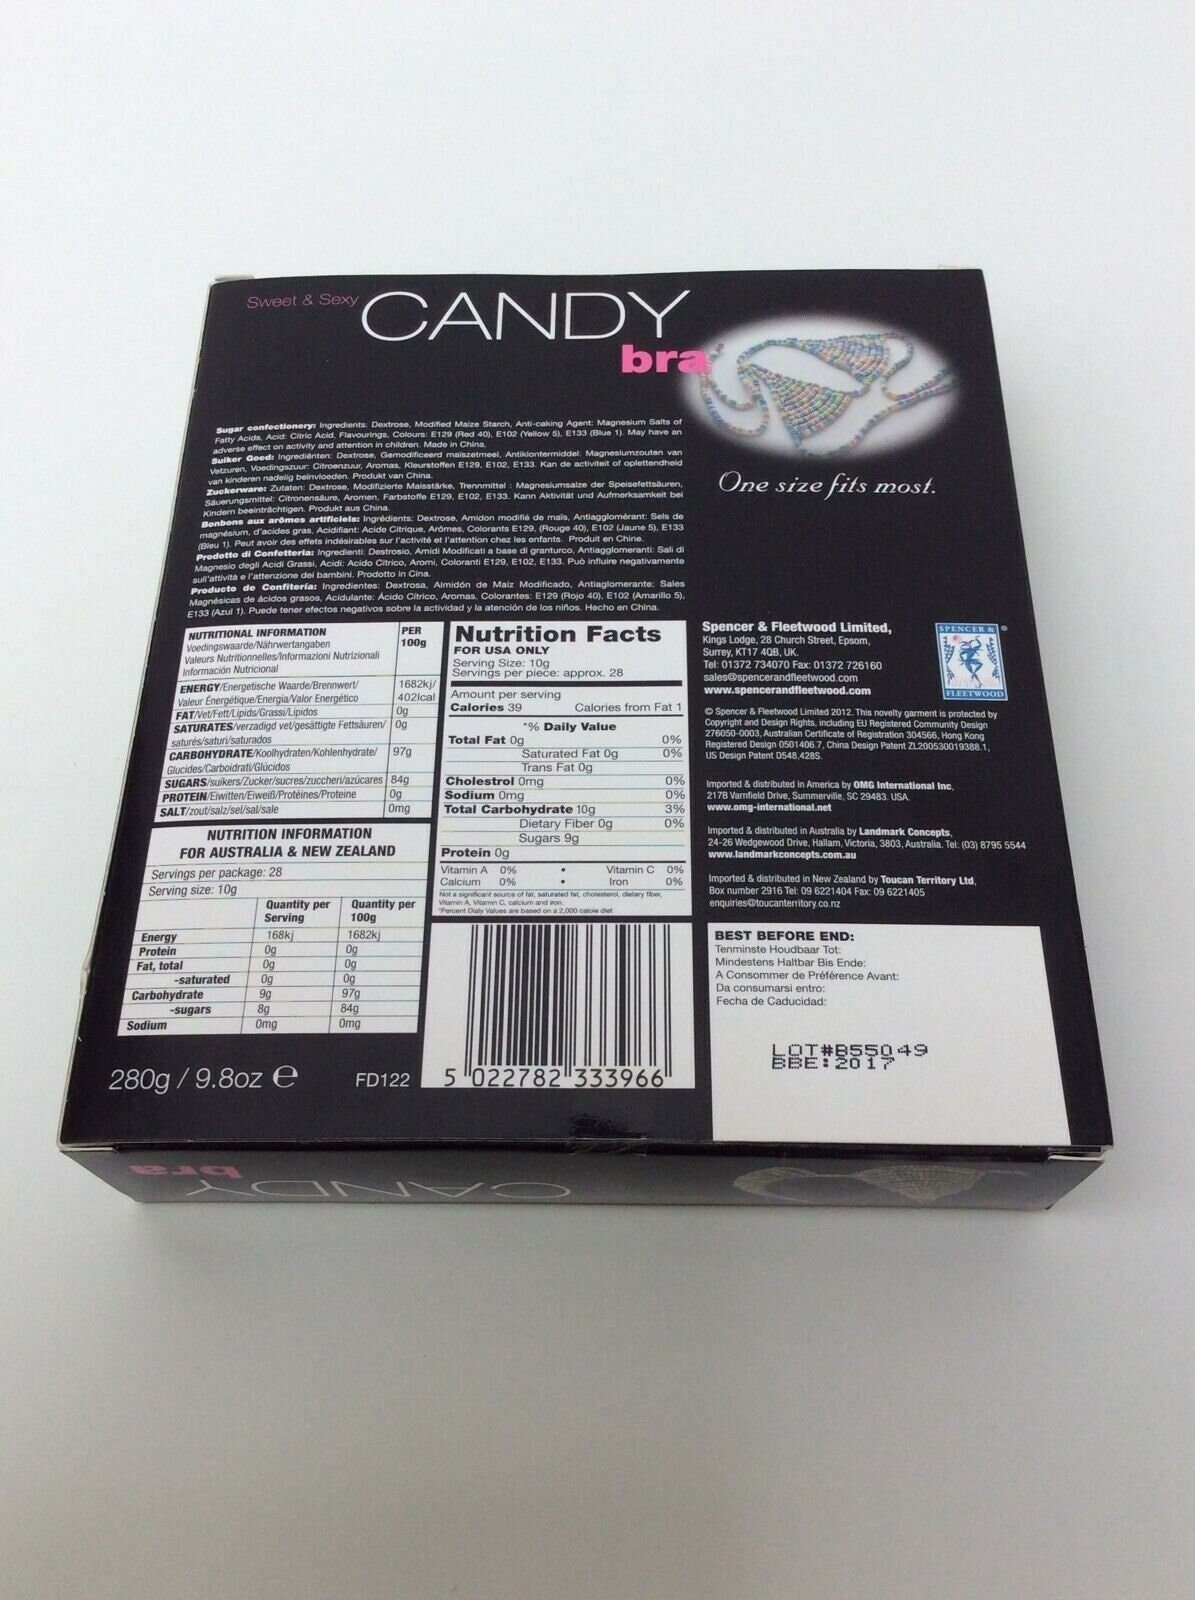 Candy Bra Sweet and Sexy Edible Underwear in Sealed Box UK SELLER Same Day  Dispatch and Free Delivery 